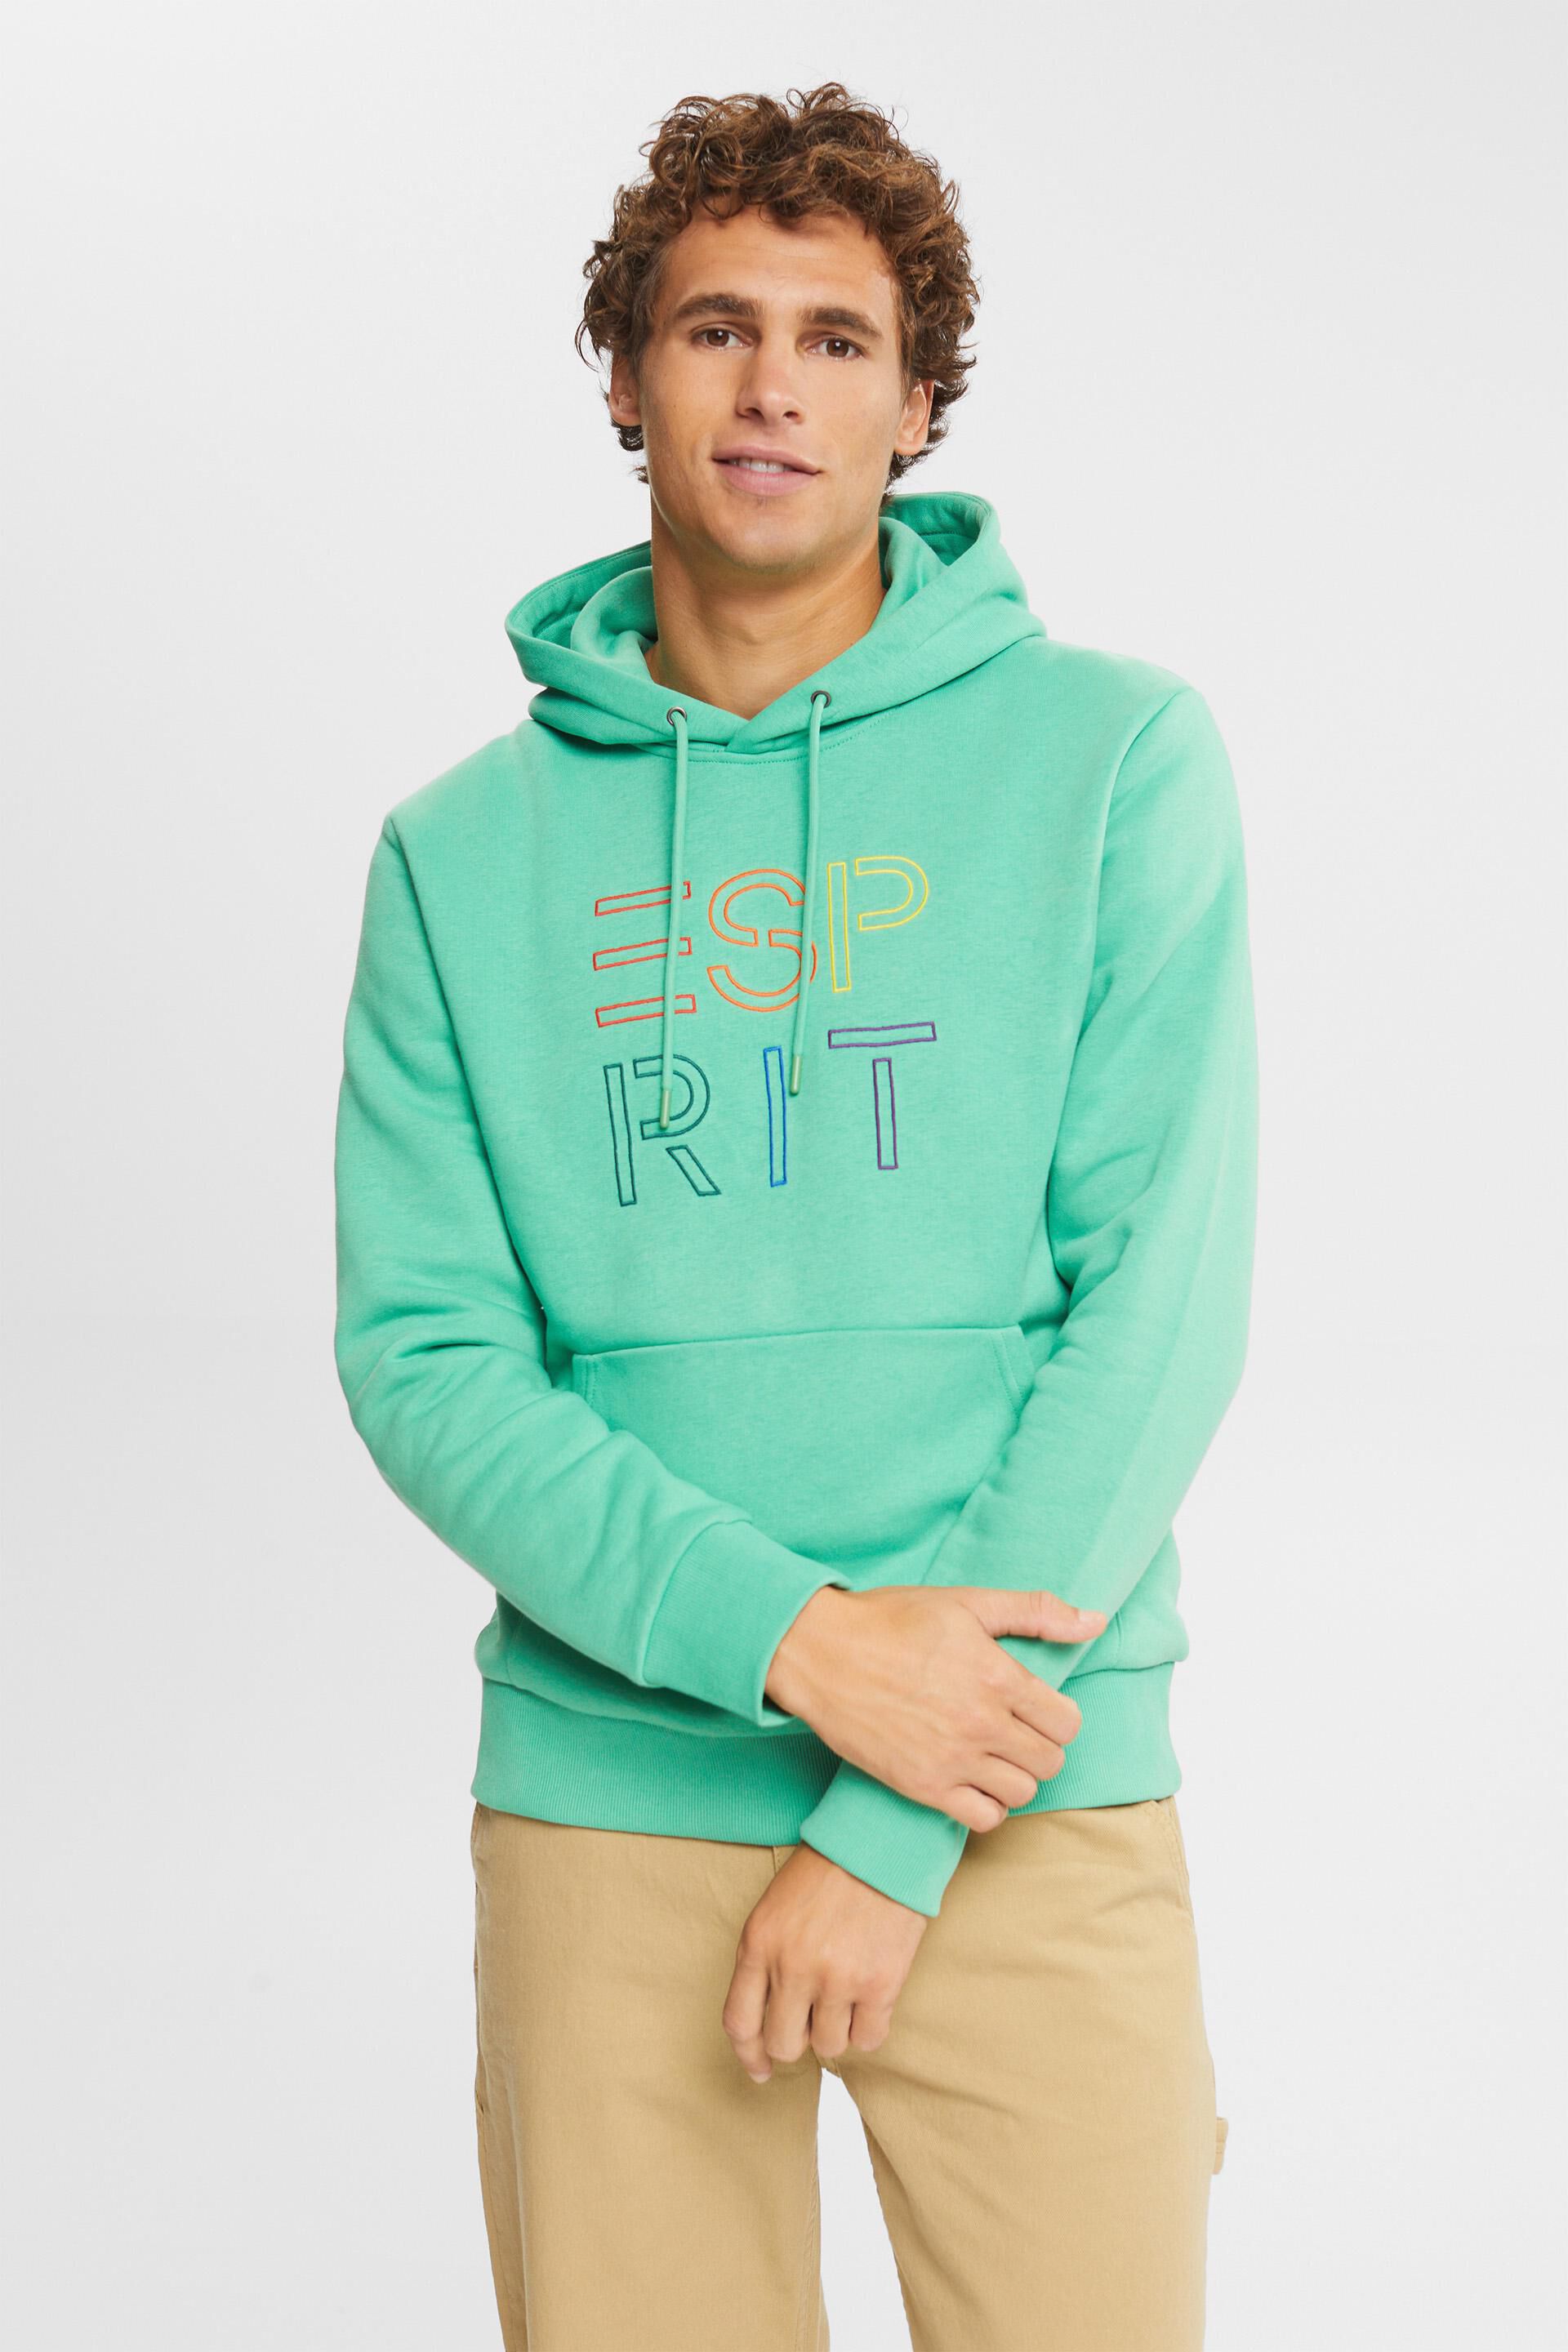 Esprit embroidery material: with hoodie recycled logo Made of